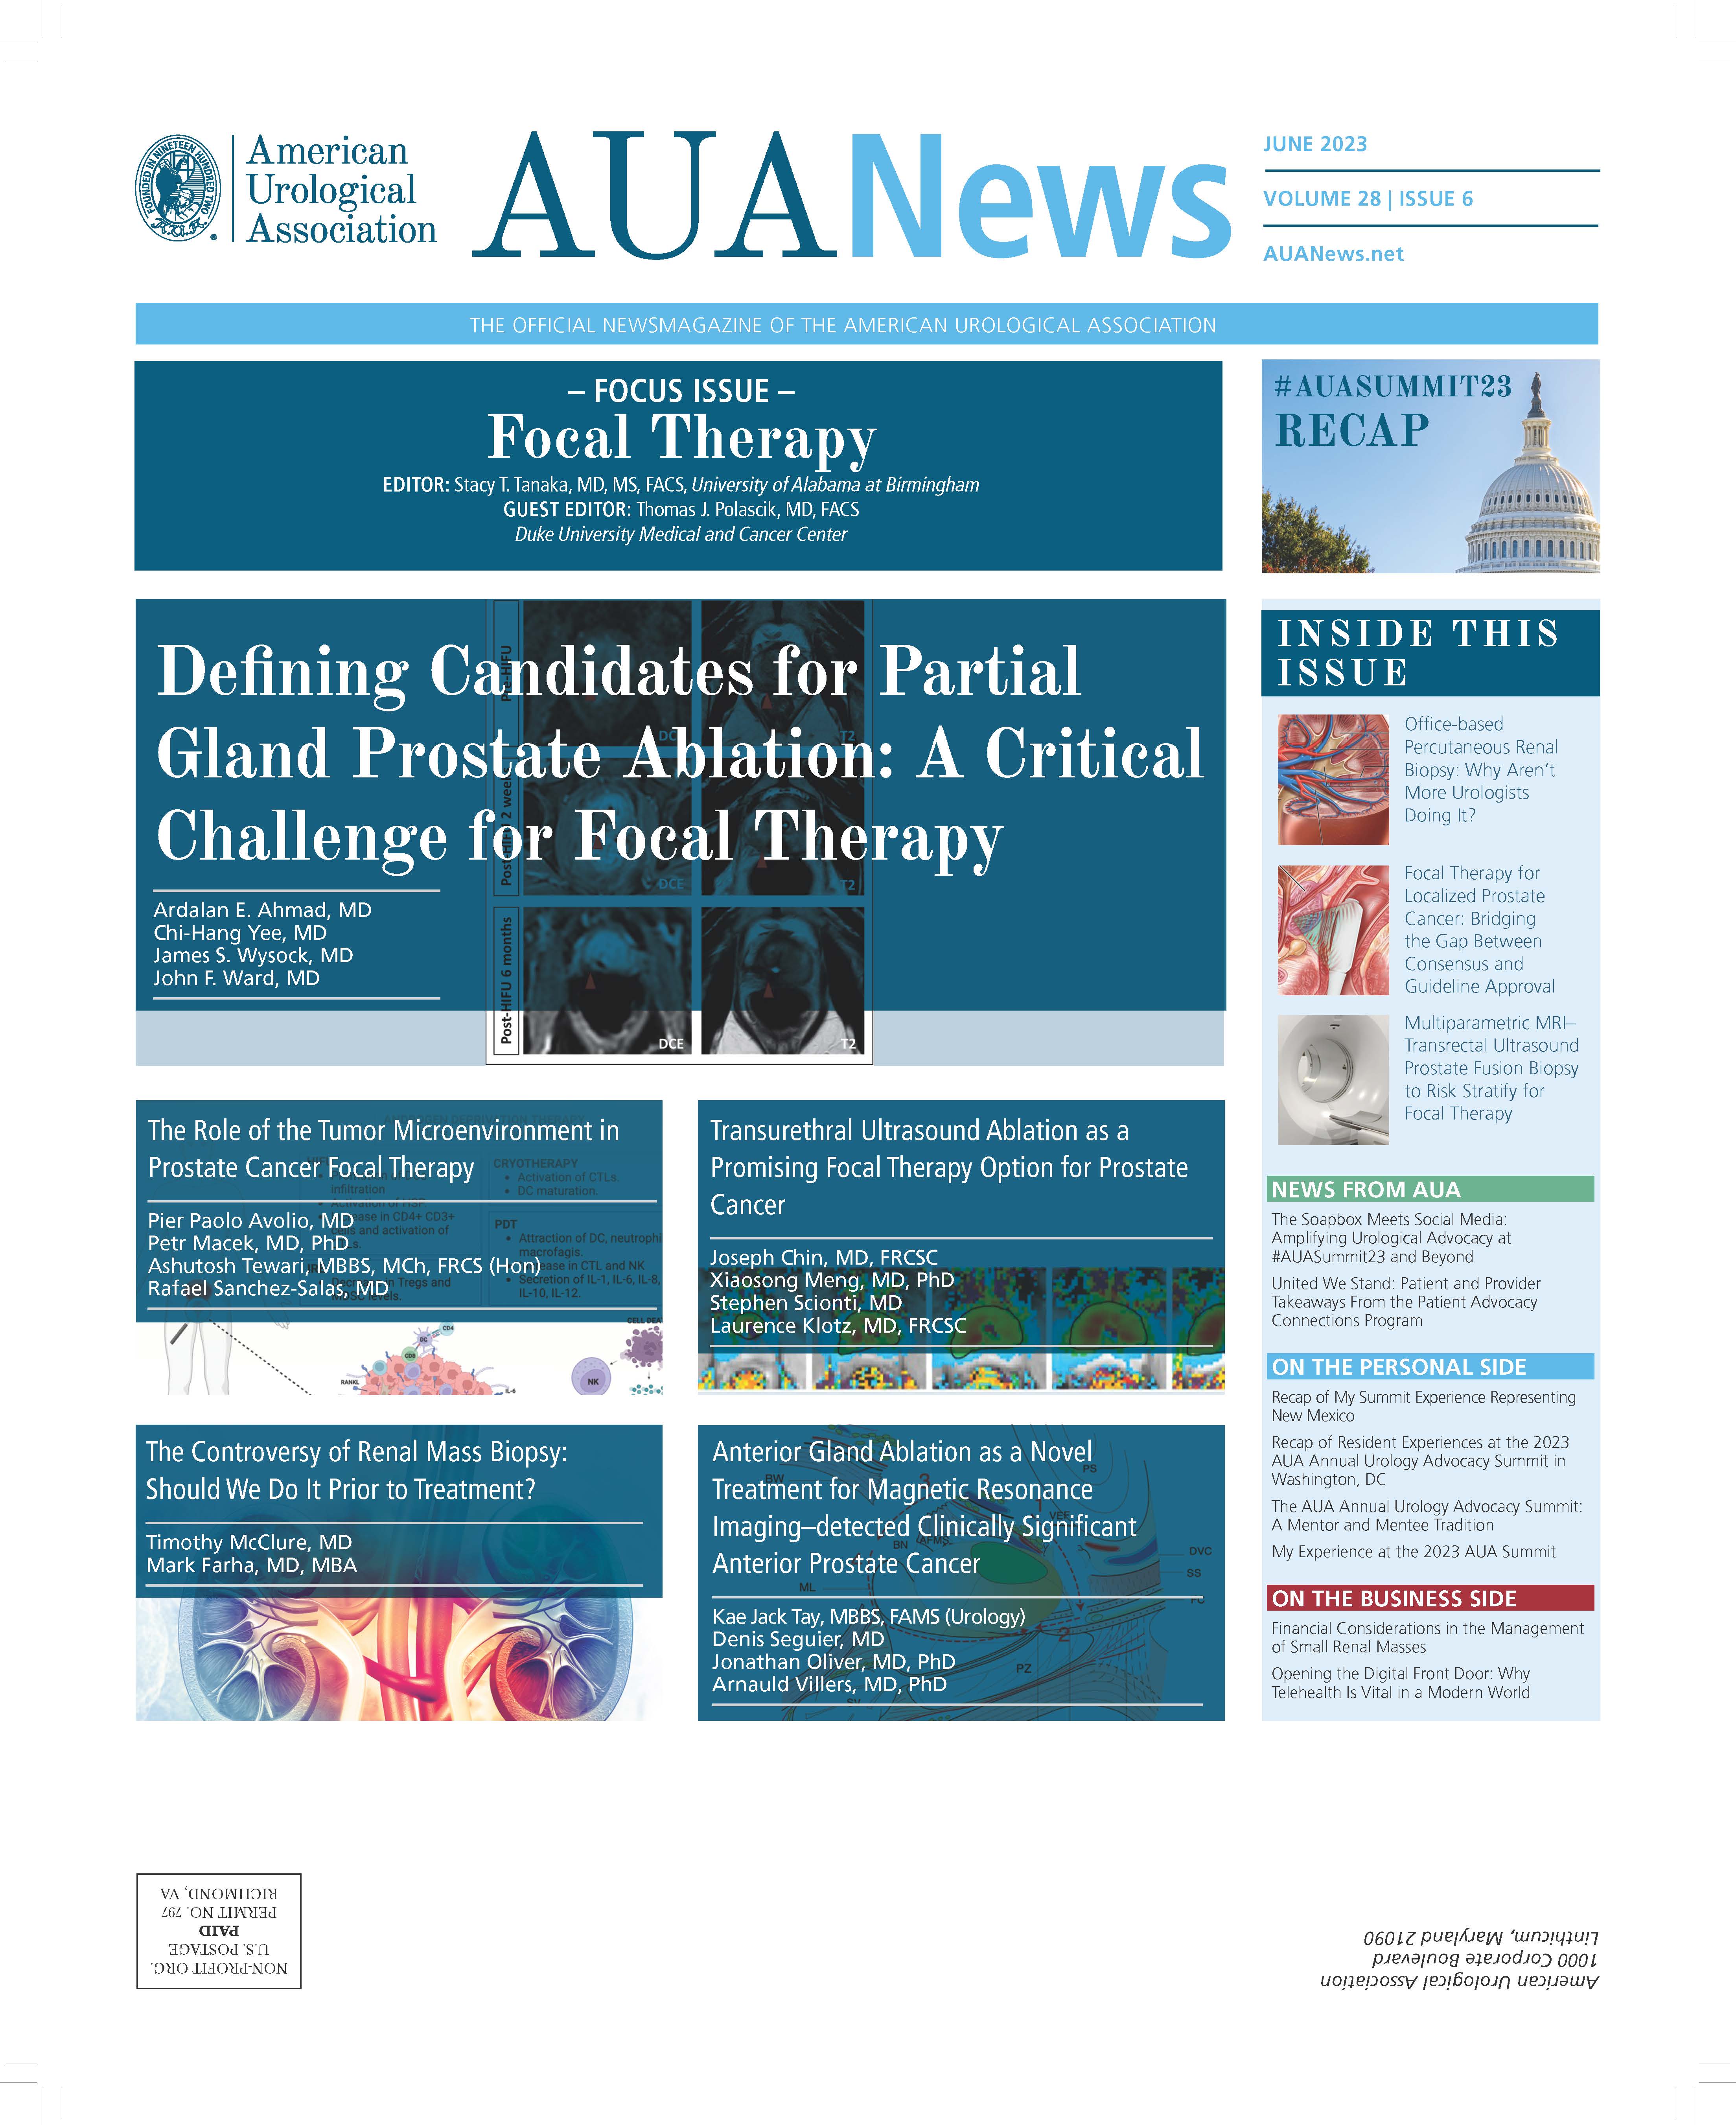 Cover image for the 2023 June AUANews